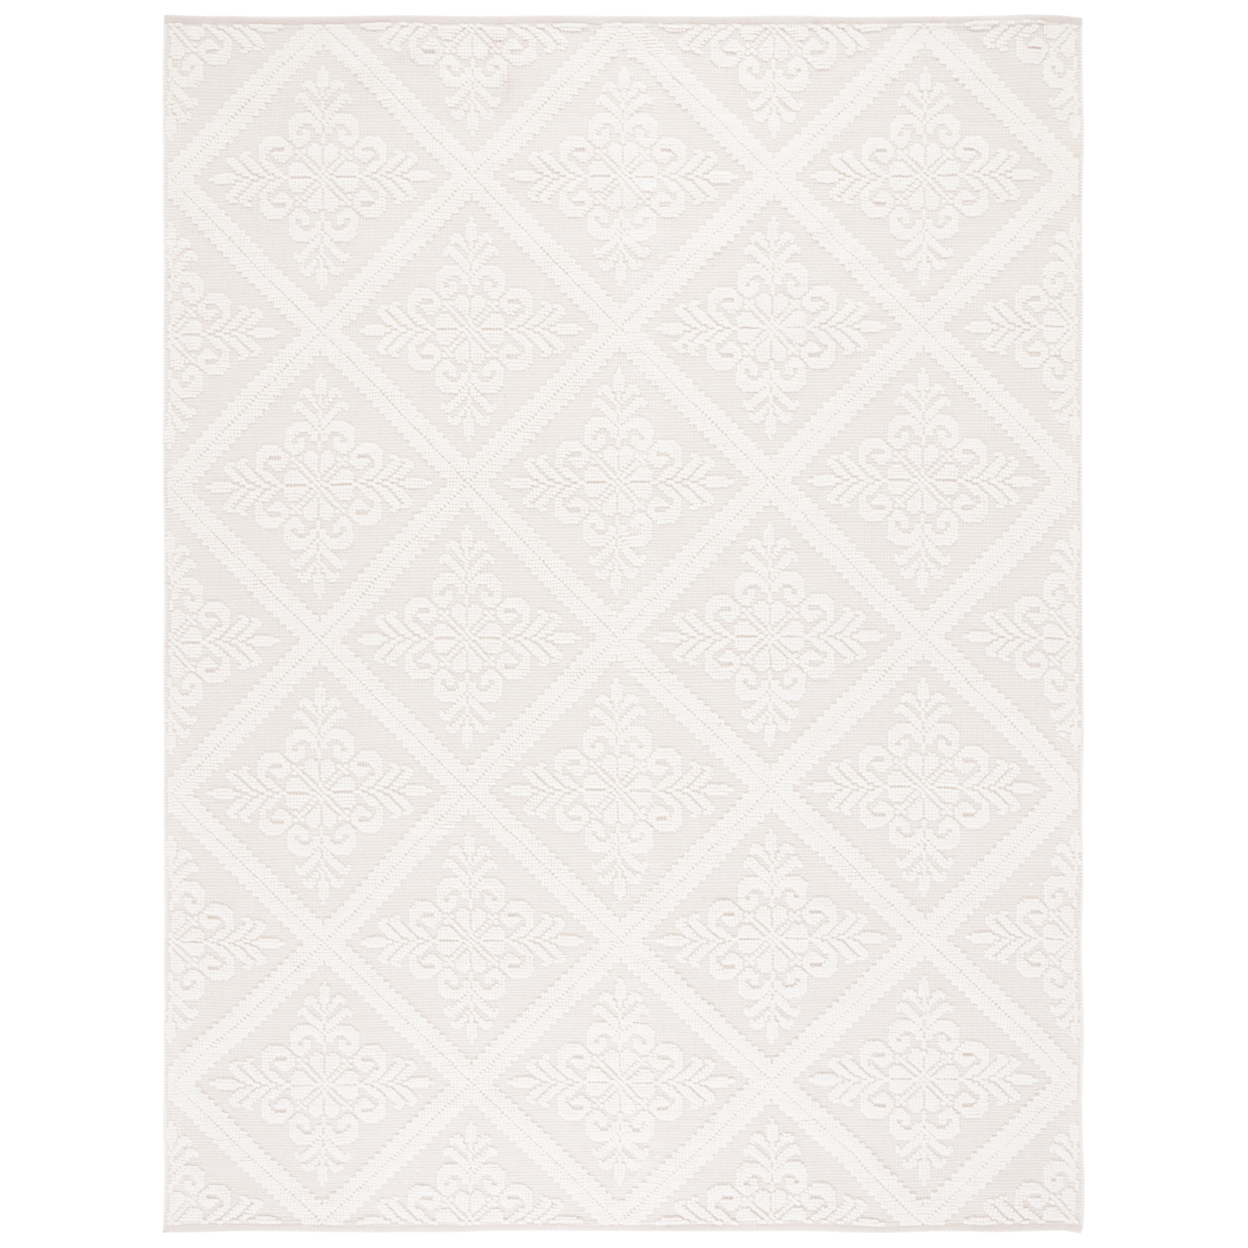 SAFAVIEH Vermont Collection VRM101A Handwoven Ivory Rug - 8 X 10